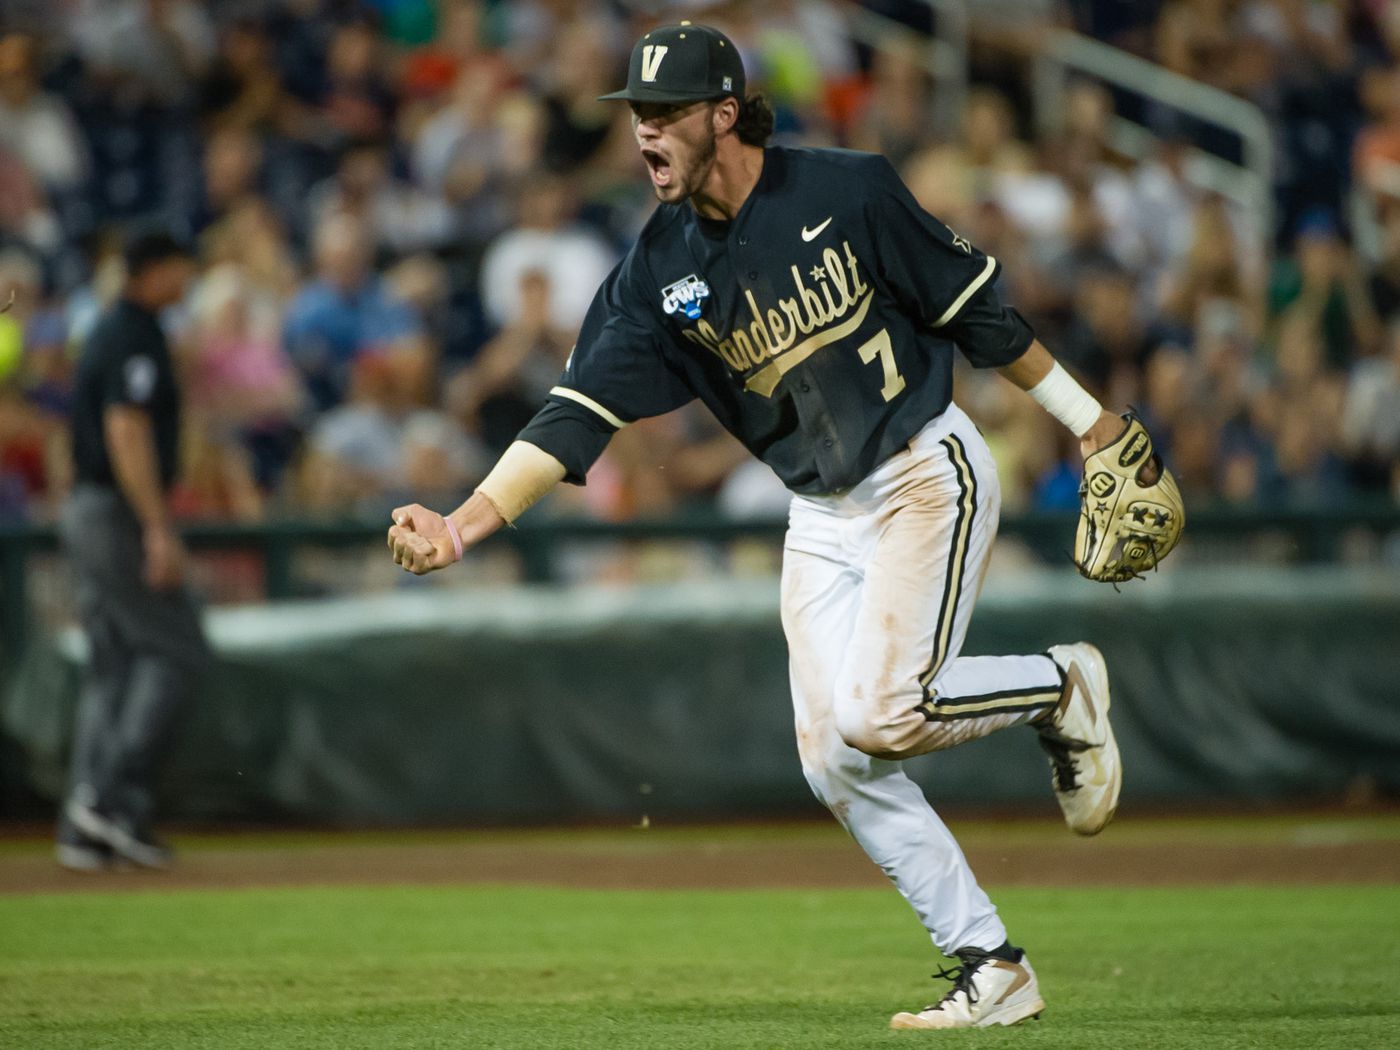 Dansby Swanson Wallpapers